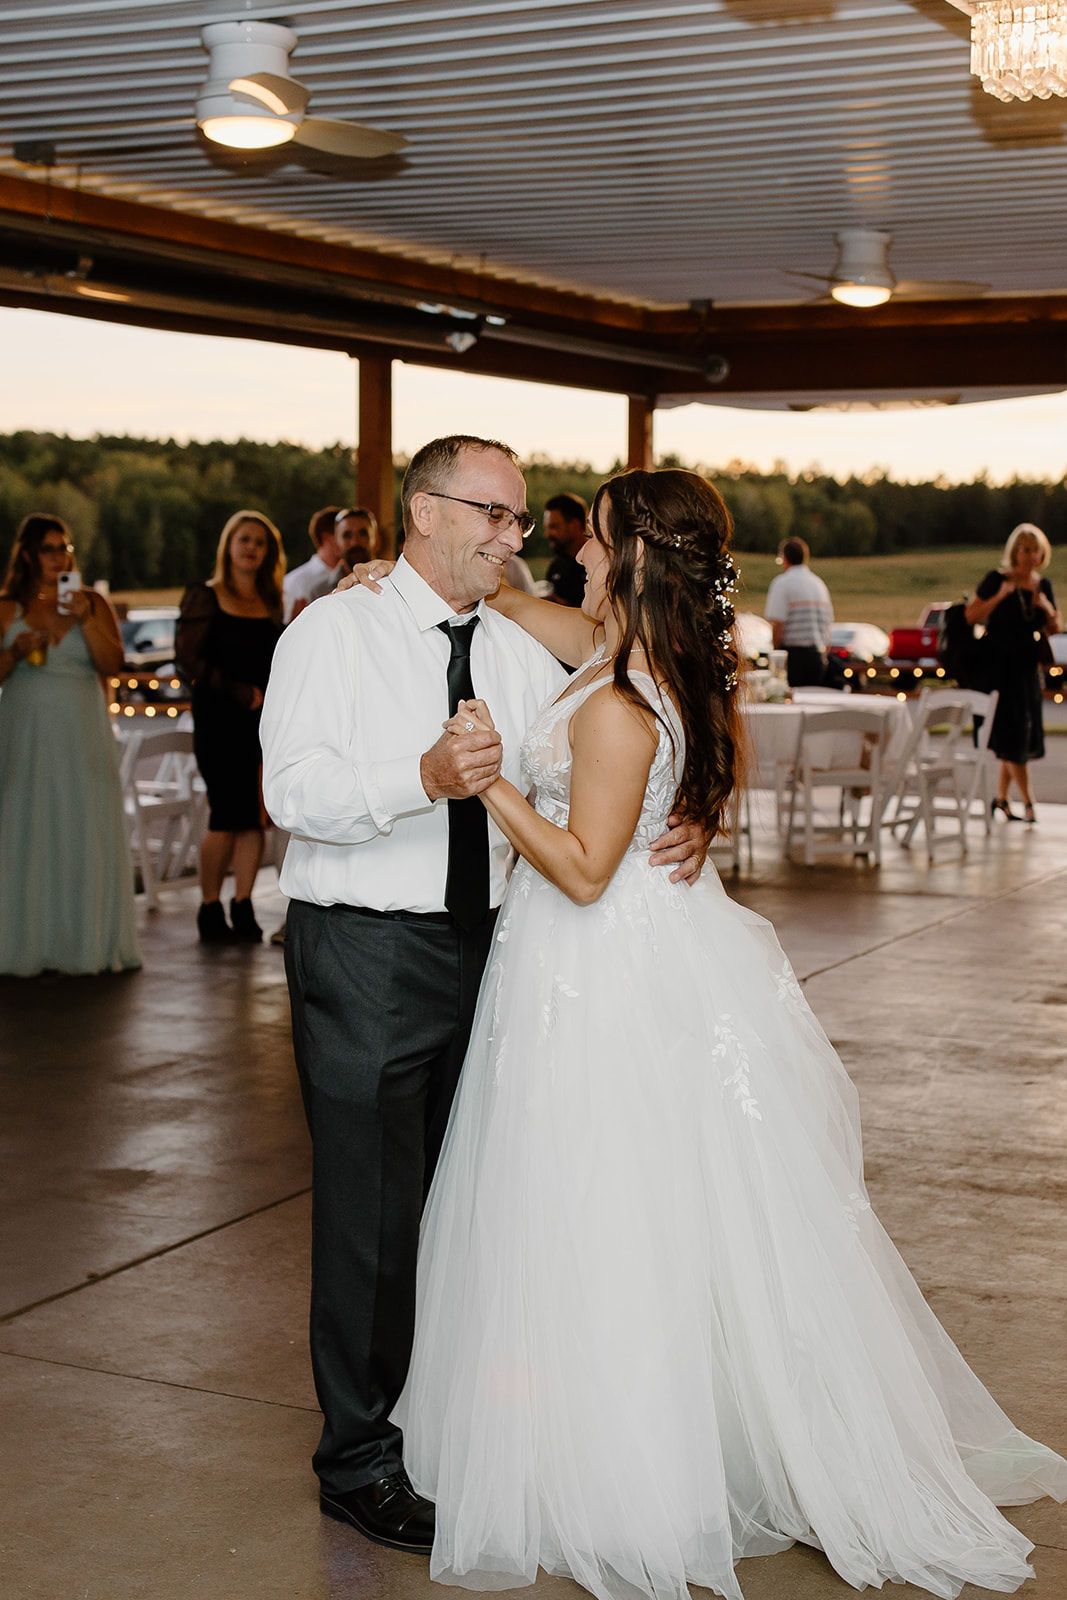 Bride and her father dance underneath lights